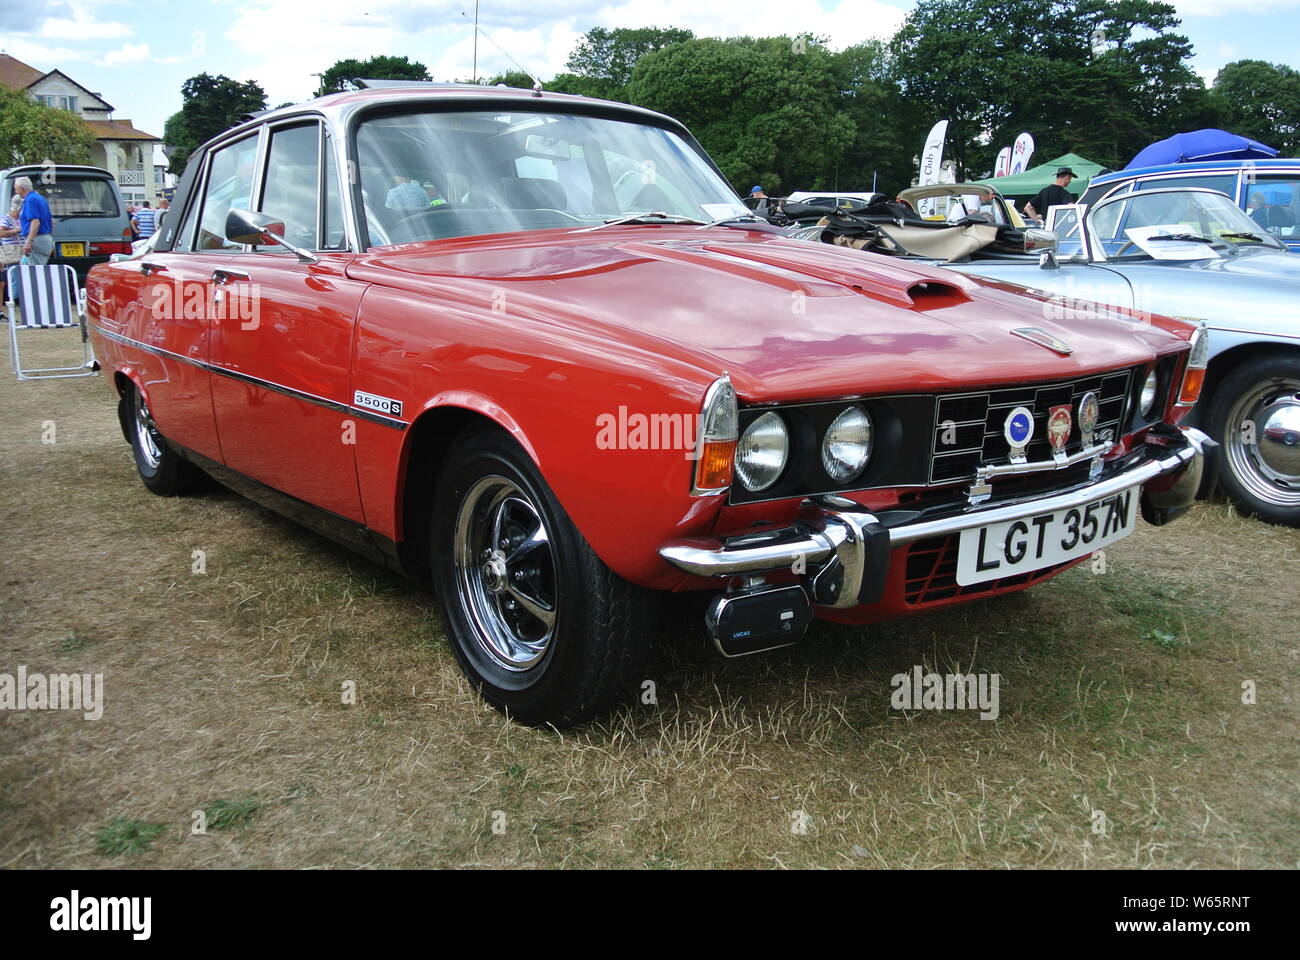 A 1975 Rover 3500S V8 parked up on display at the Riviera classic car show, Paignton, Devon, England, UK. Stock Photo